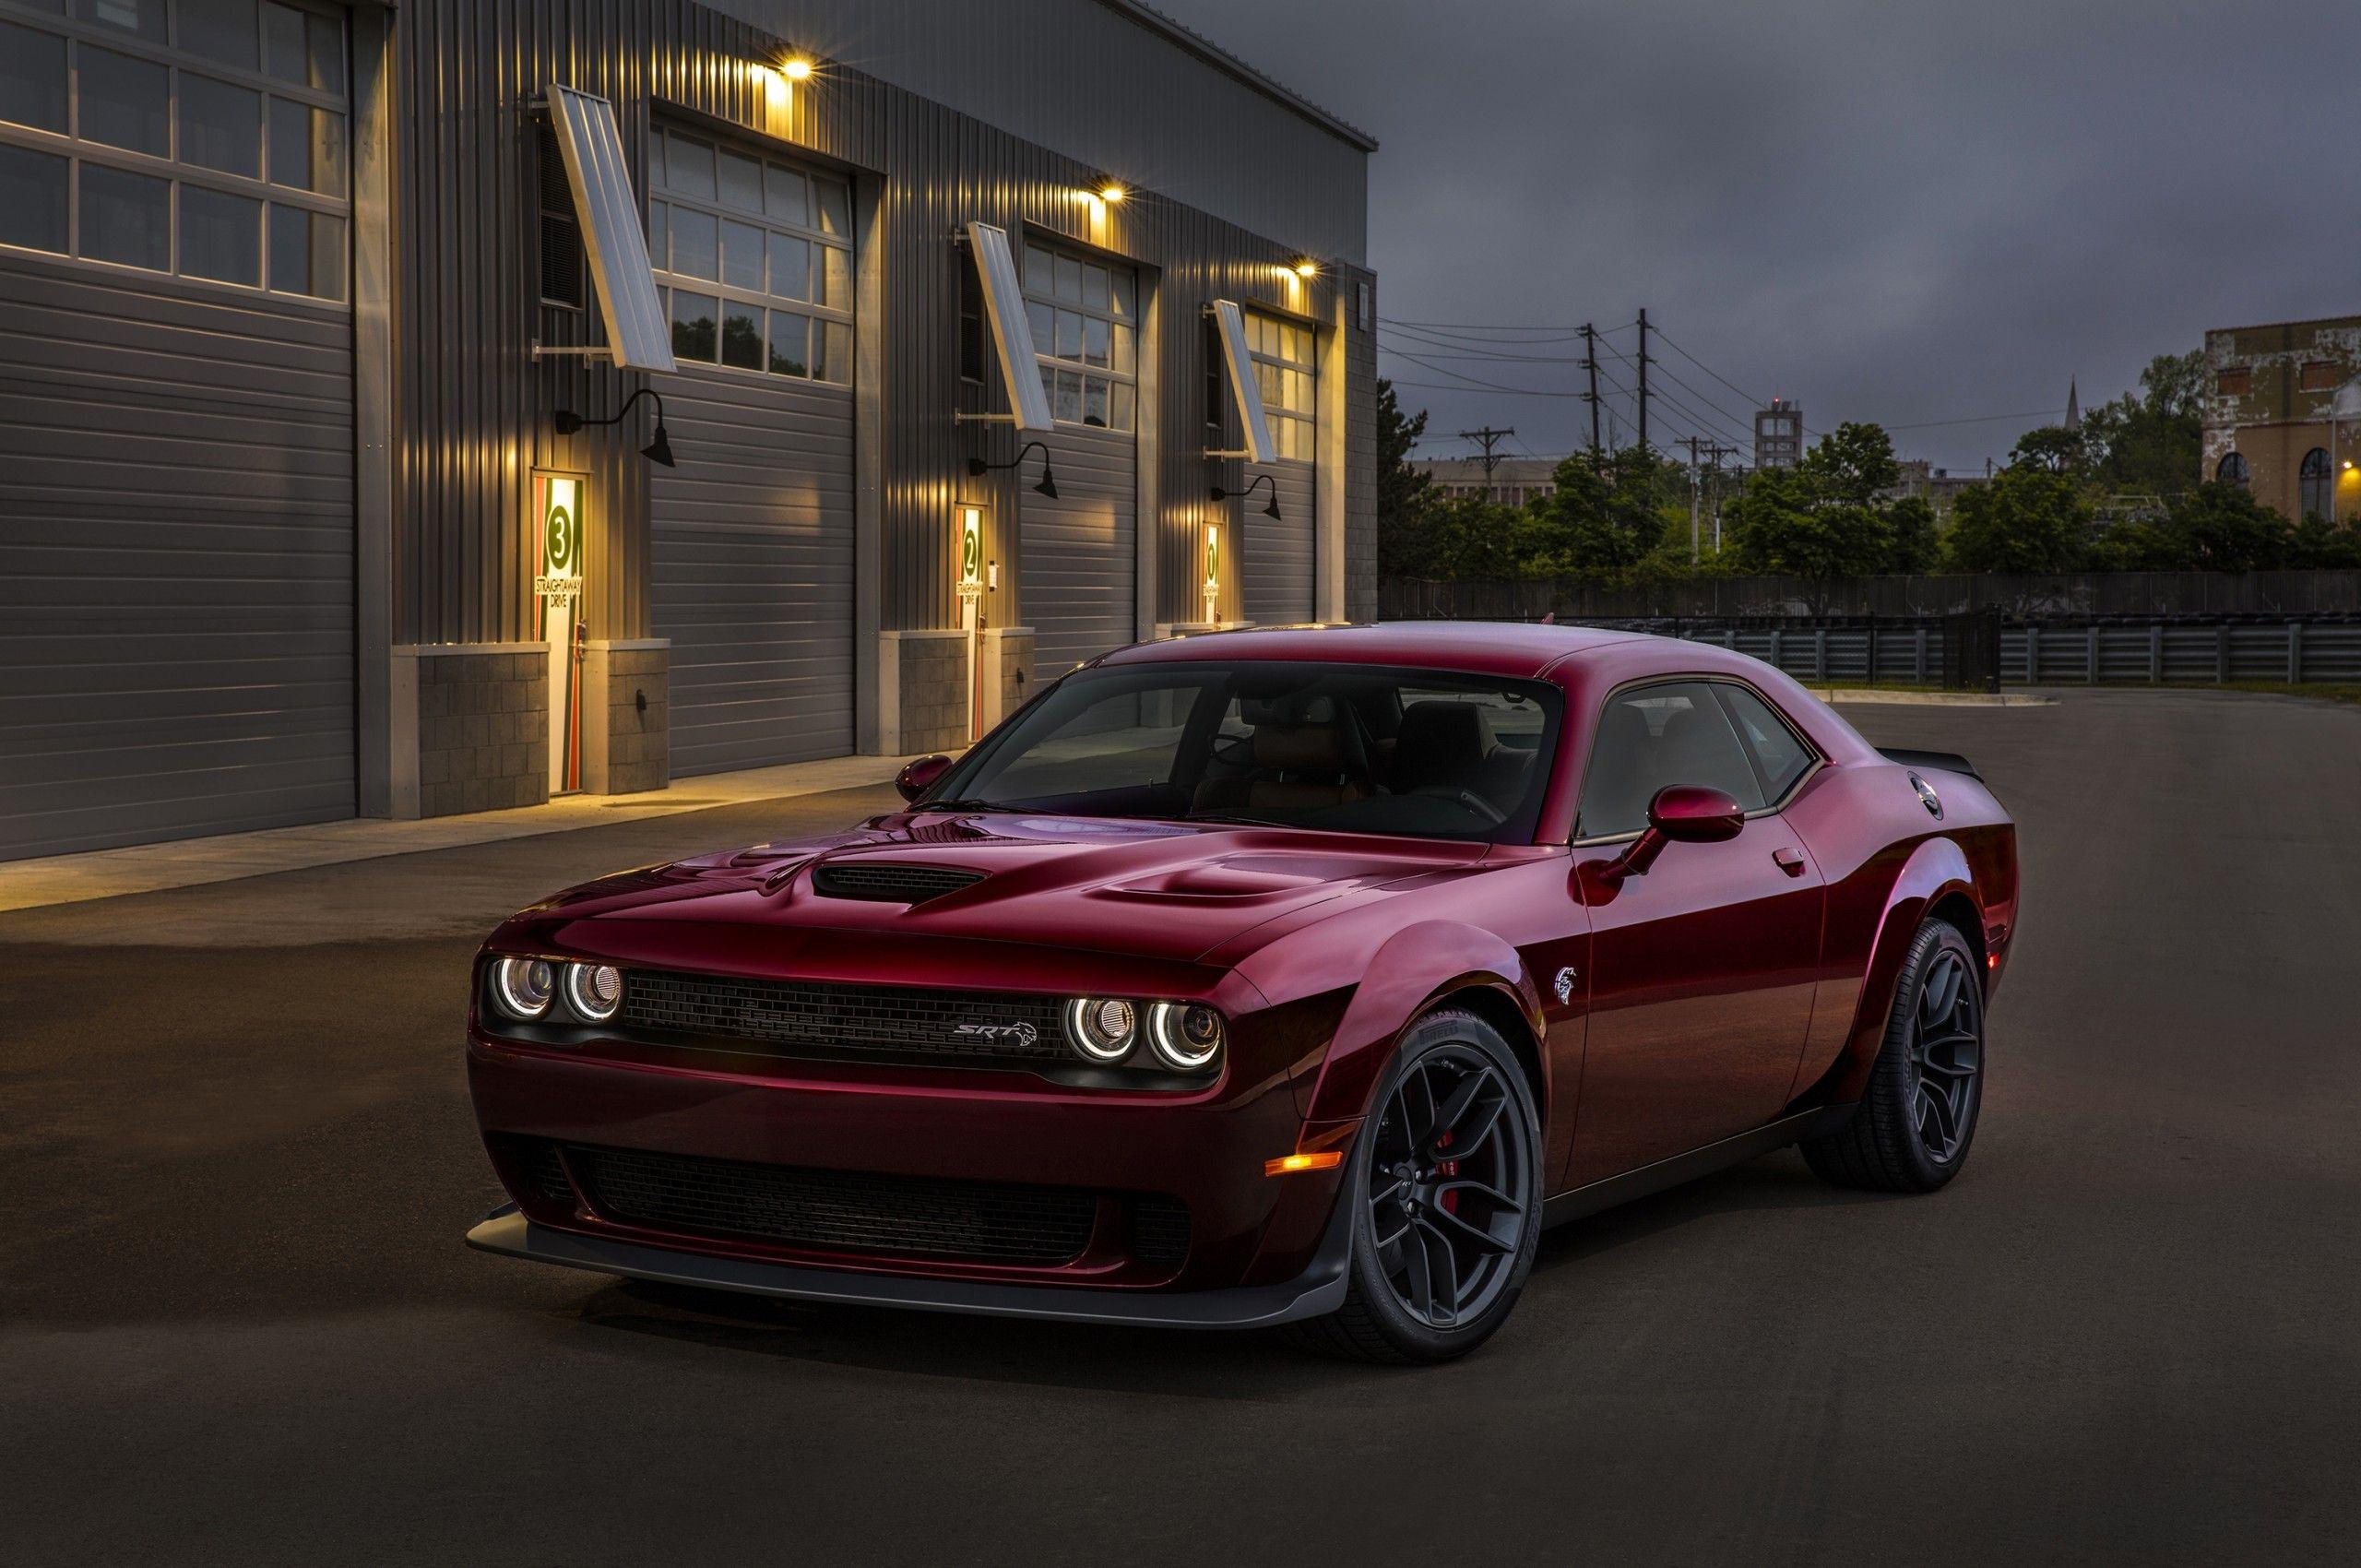 Download 2560x1700 Dodge Challenger, Red, Muscle, Cars Wallpaper